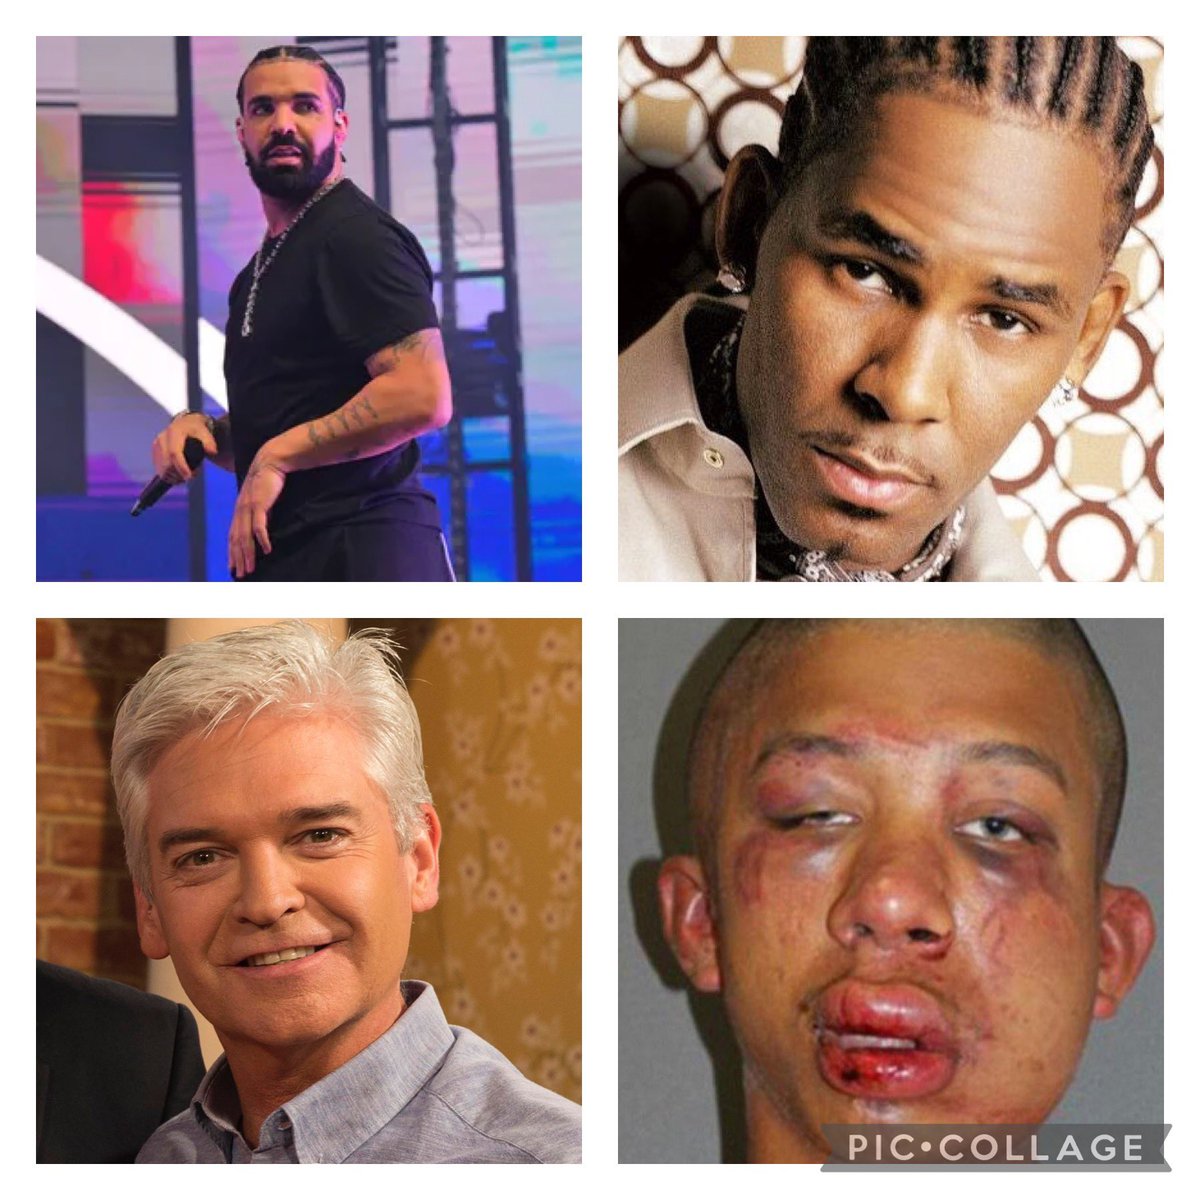 What do these 4 people all have in common @Drake R Kelly, Phillip Schofield and sone yout #drakepedo #BBLDRIZZY